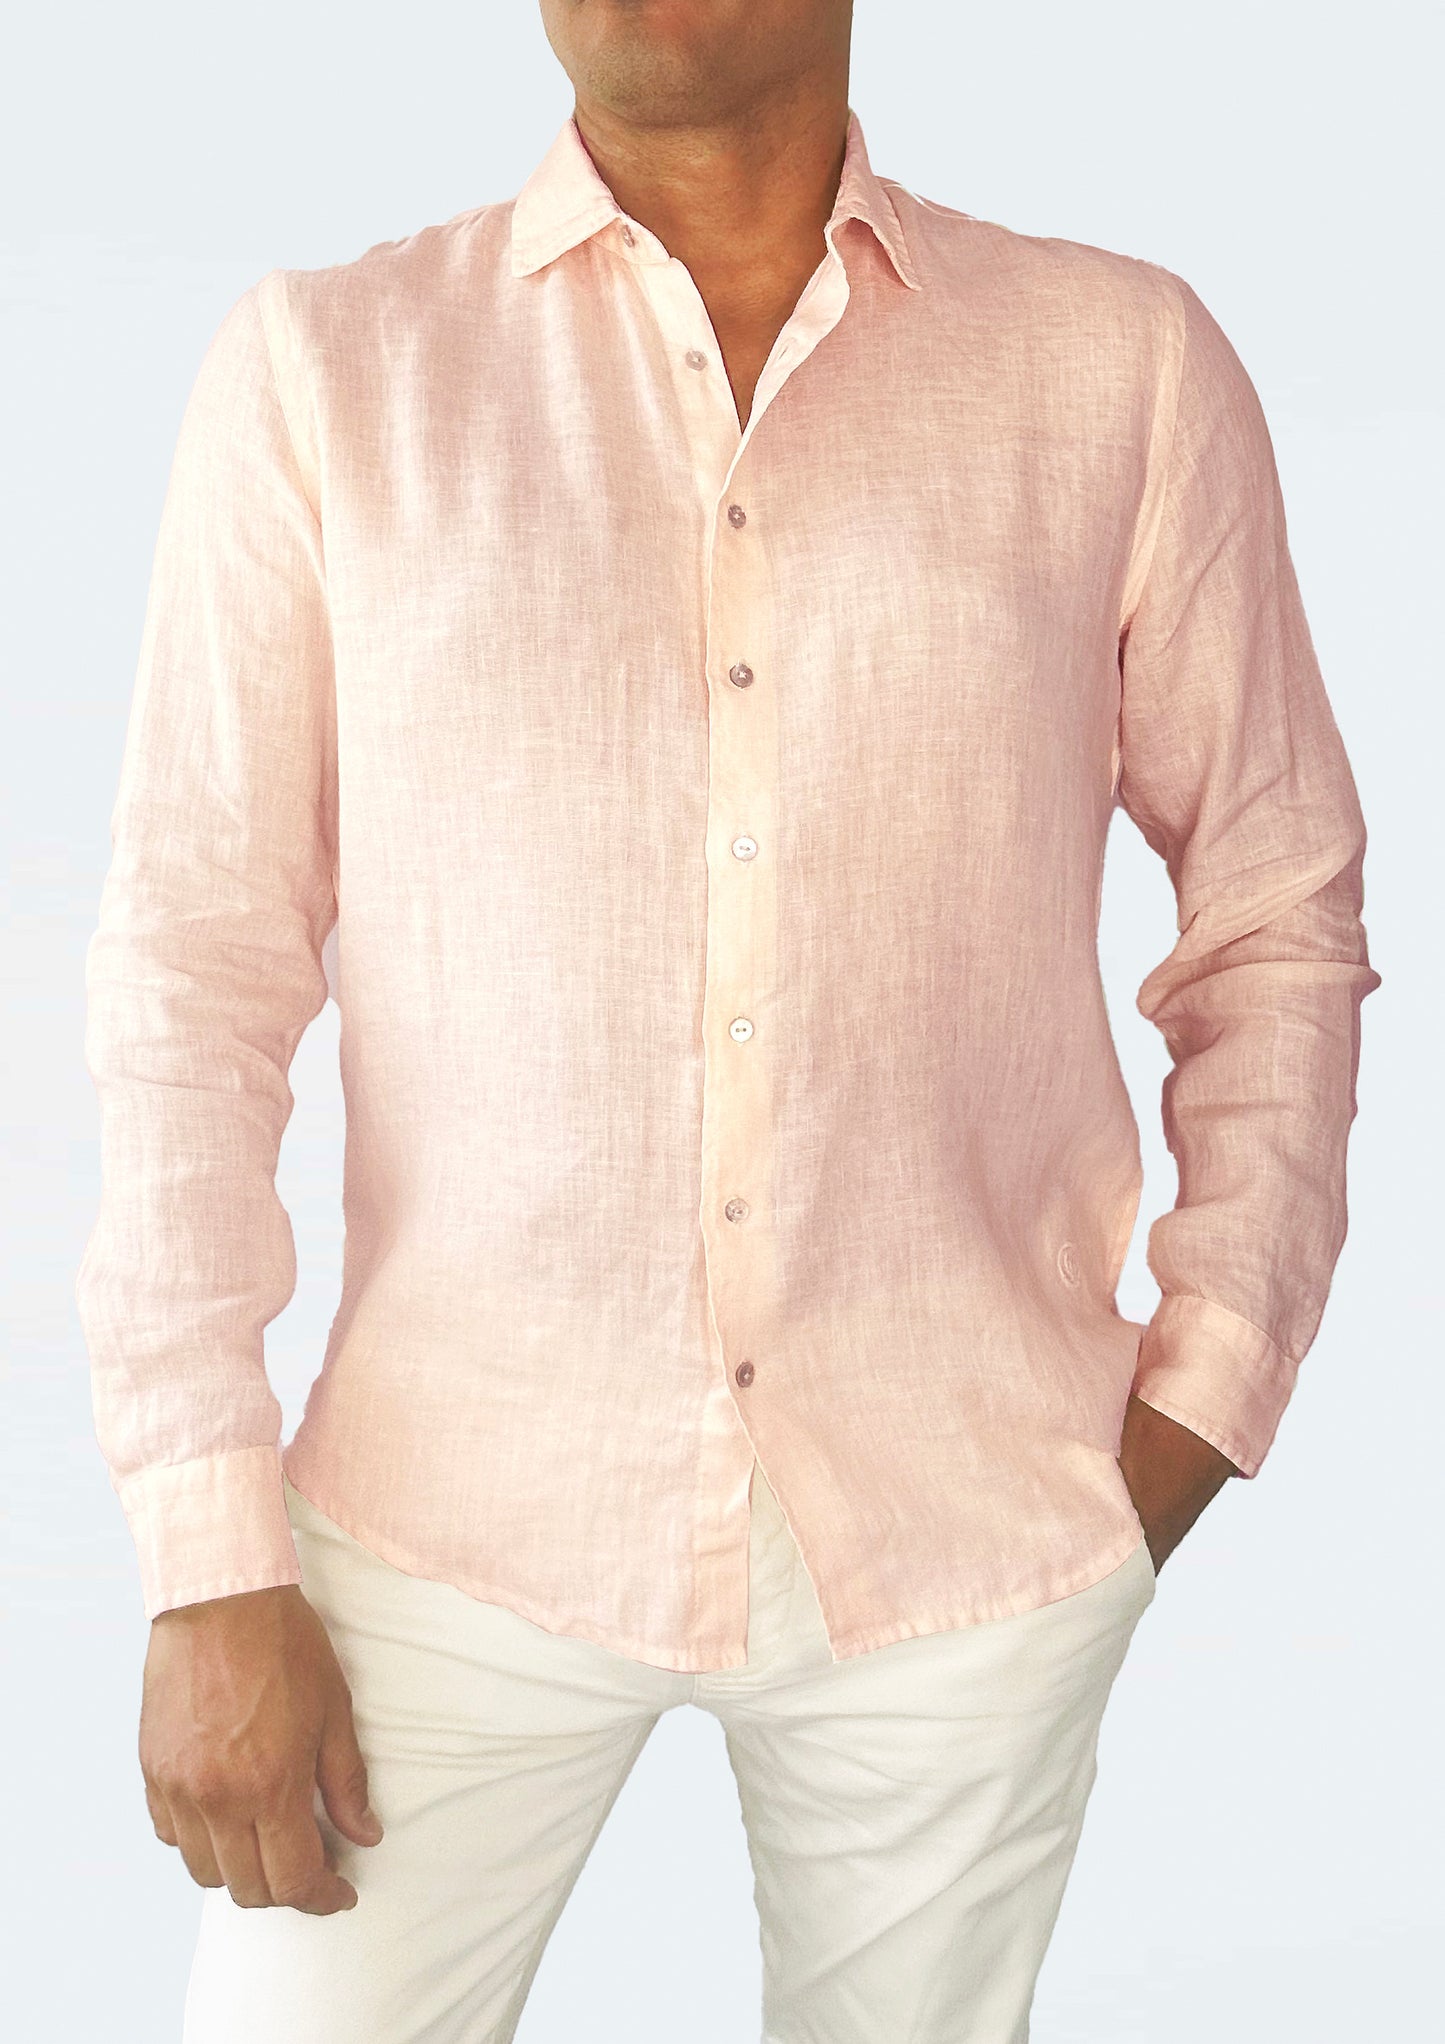 Salmon 100% linen unisex shirt with mother-of-pearl buttons